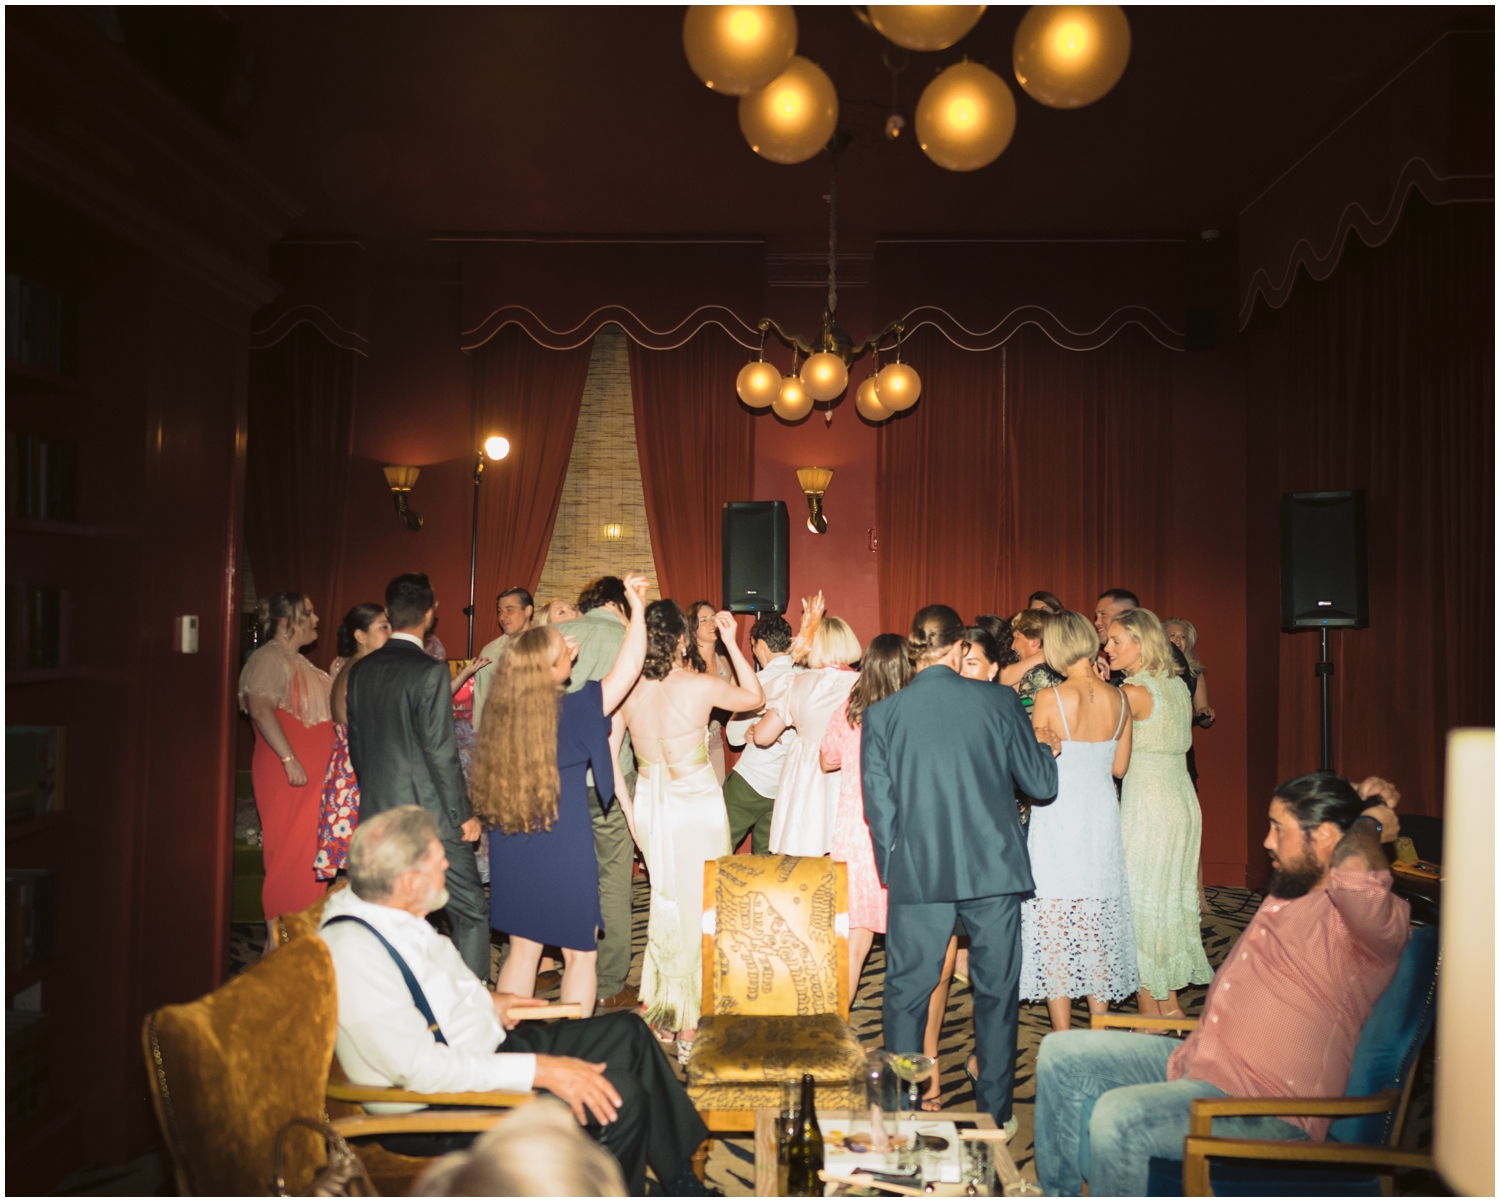 Guests gather on the dance floor.